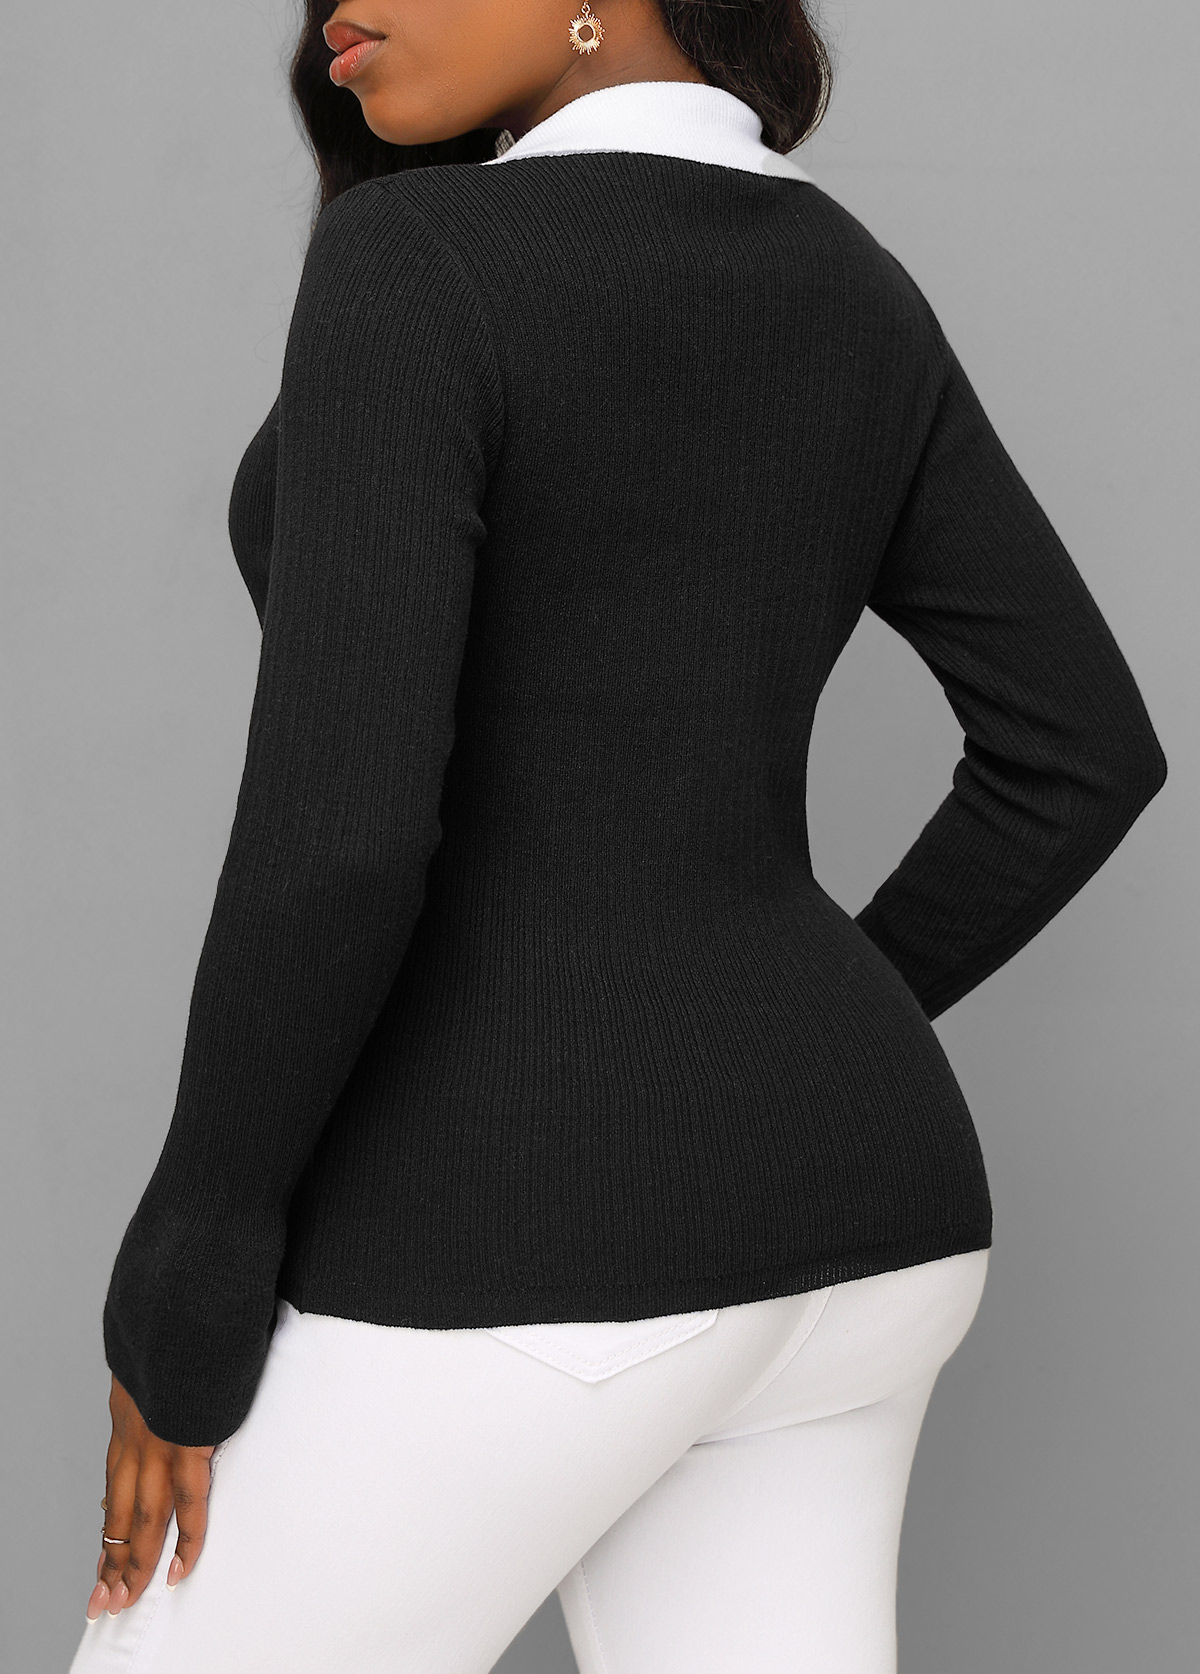 Contrast Color Black Polo Collar Long Sleeve Sweater